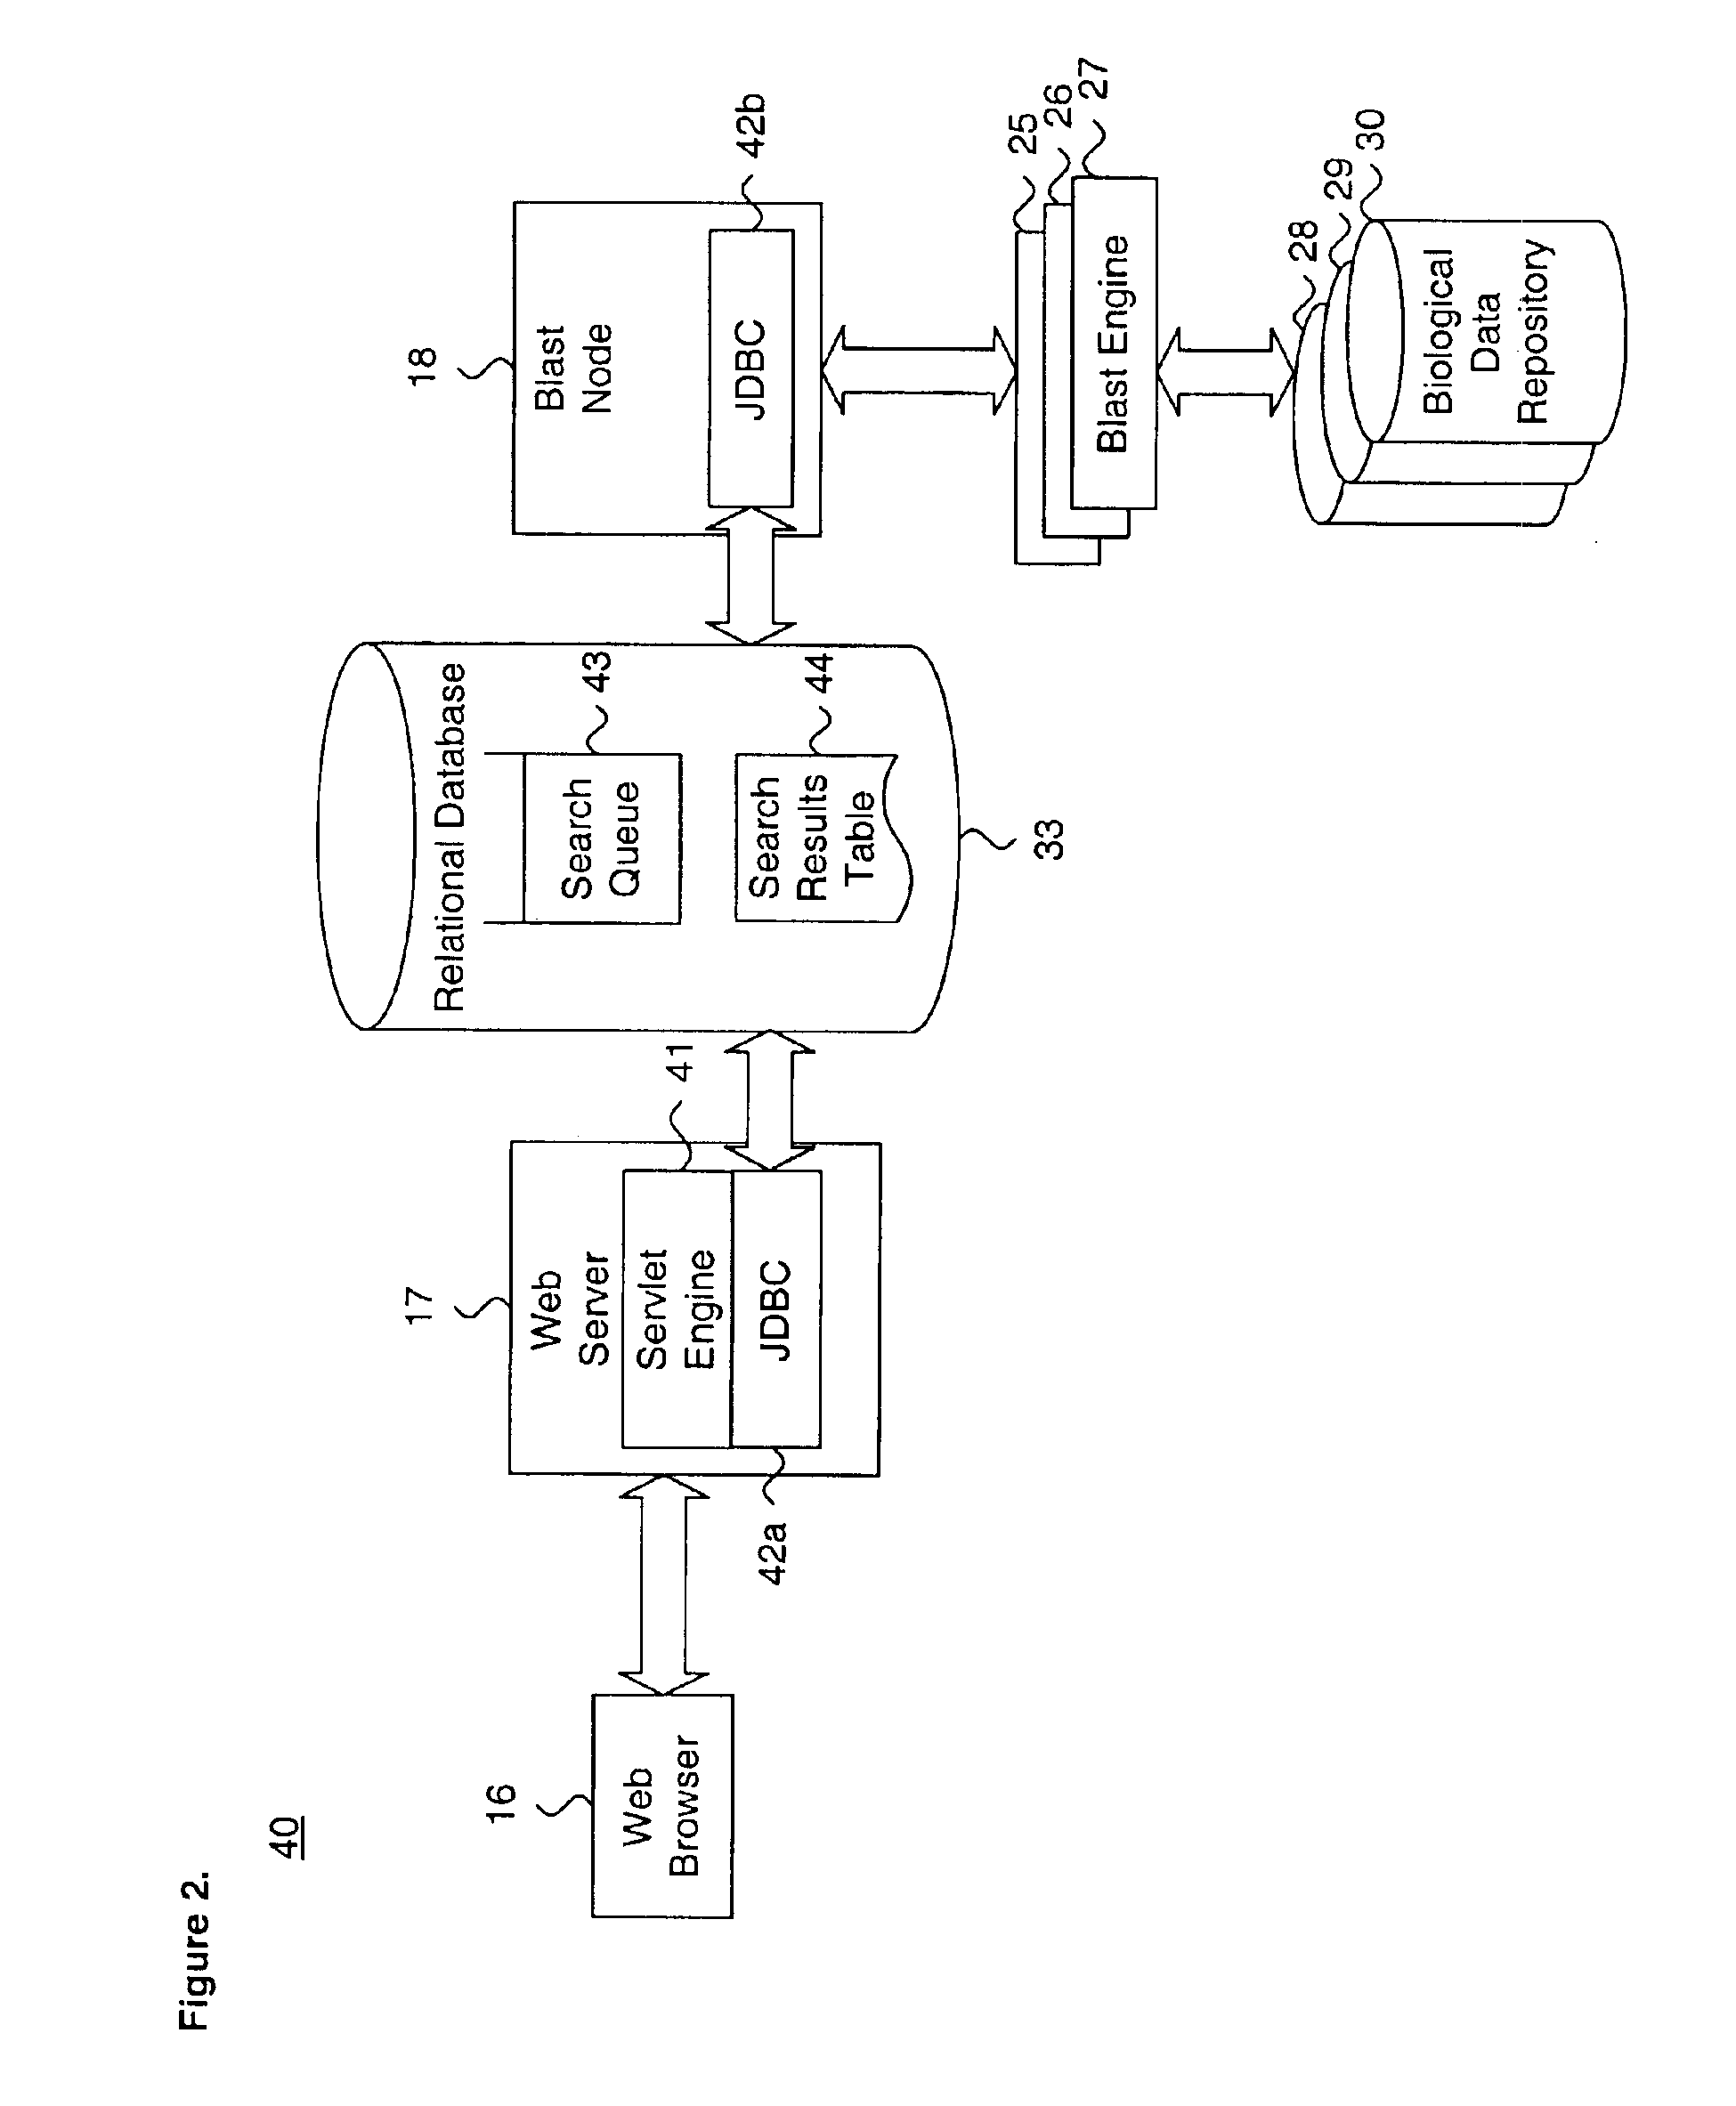 System and method for transacting and manipulating a multi-sequence search using biological data repositories